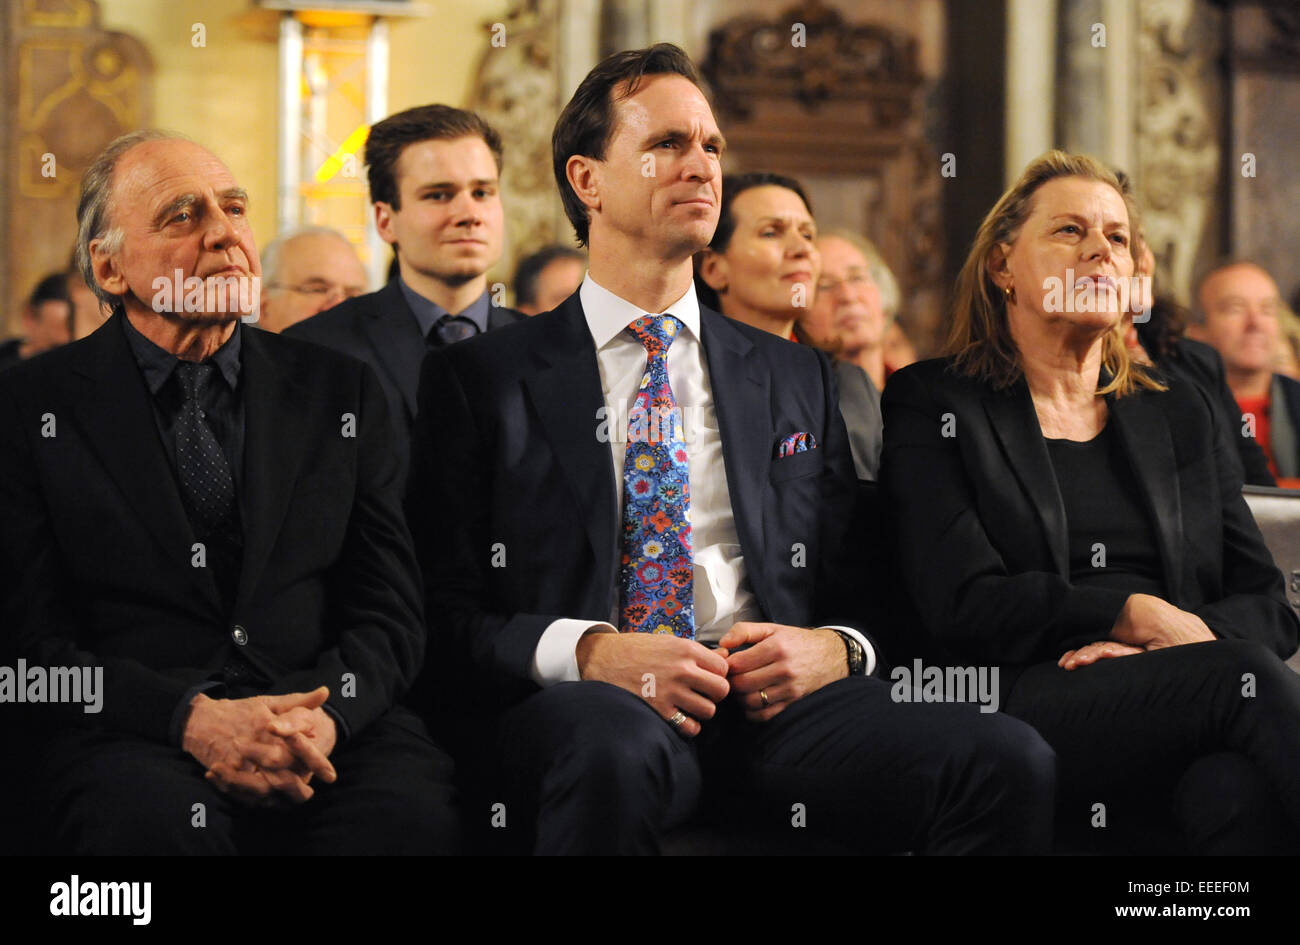 Swiss actor and eulogist of the Bremen Film Prize award, Bruno Ganz (L-R), sits next to the chairman of the board of Sparkasse Bremen, Tim Nesemann and award winner and Swiss producer Ruth Waldburger during the award ceremony for the Bremen Film Prize in the town hall of Bremen, Germany, 15 January 2015. The Bremen Film Prize is endowed with 8,000 euro sponsored by the Sparkasse Bremen Foundation. Bruno Ganz was the first ever awardee to be honoured with the Bremen Film Prize. Photo: Ingo Wagner/dpa Stock Photo